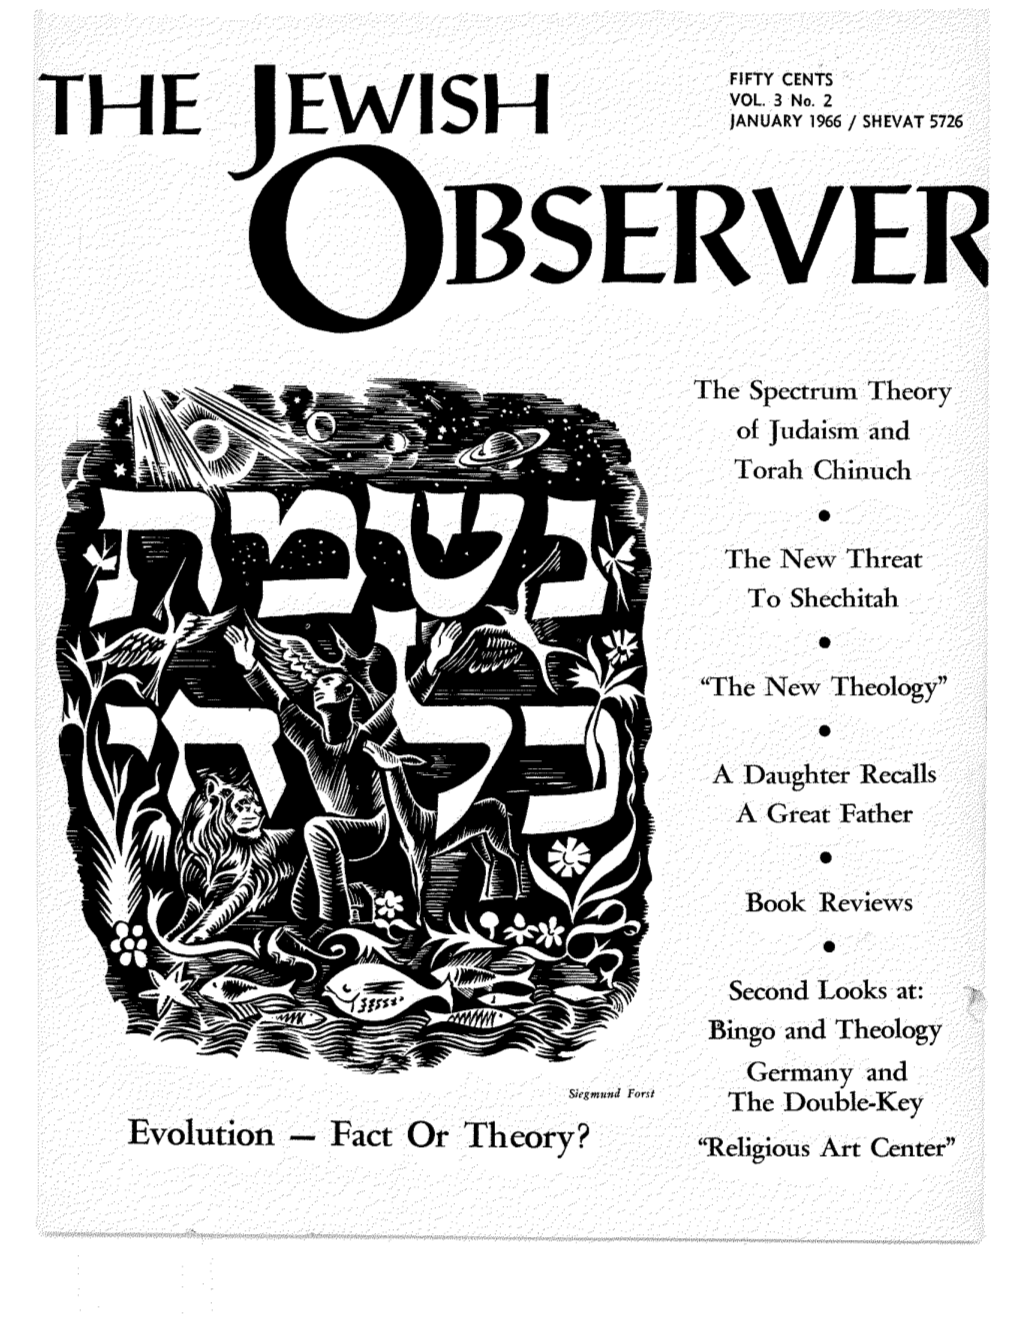 The Spectrum Theory of Judaism and Torah Chinuch